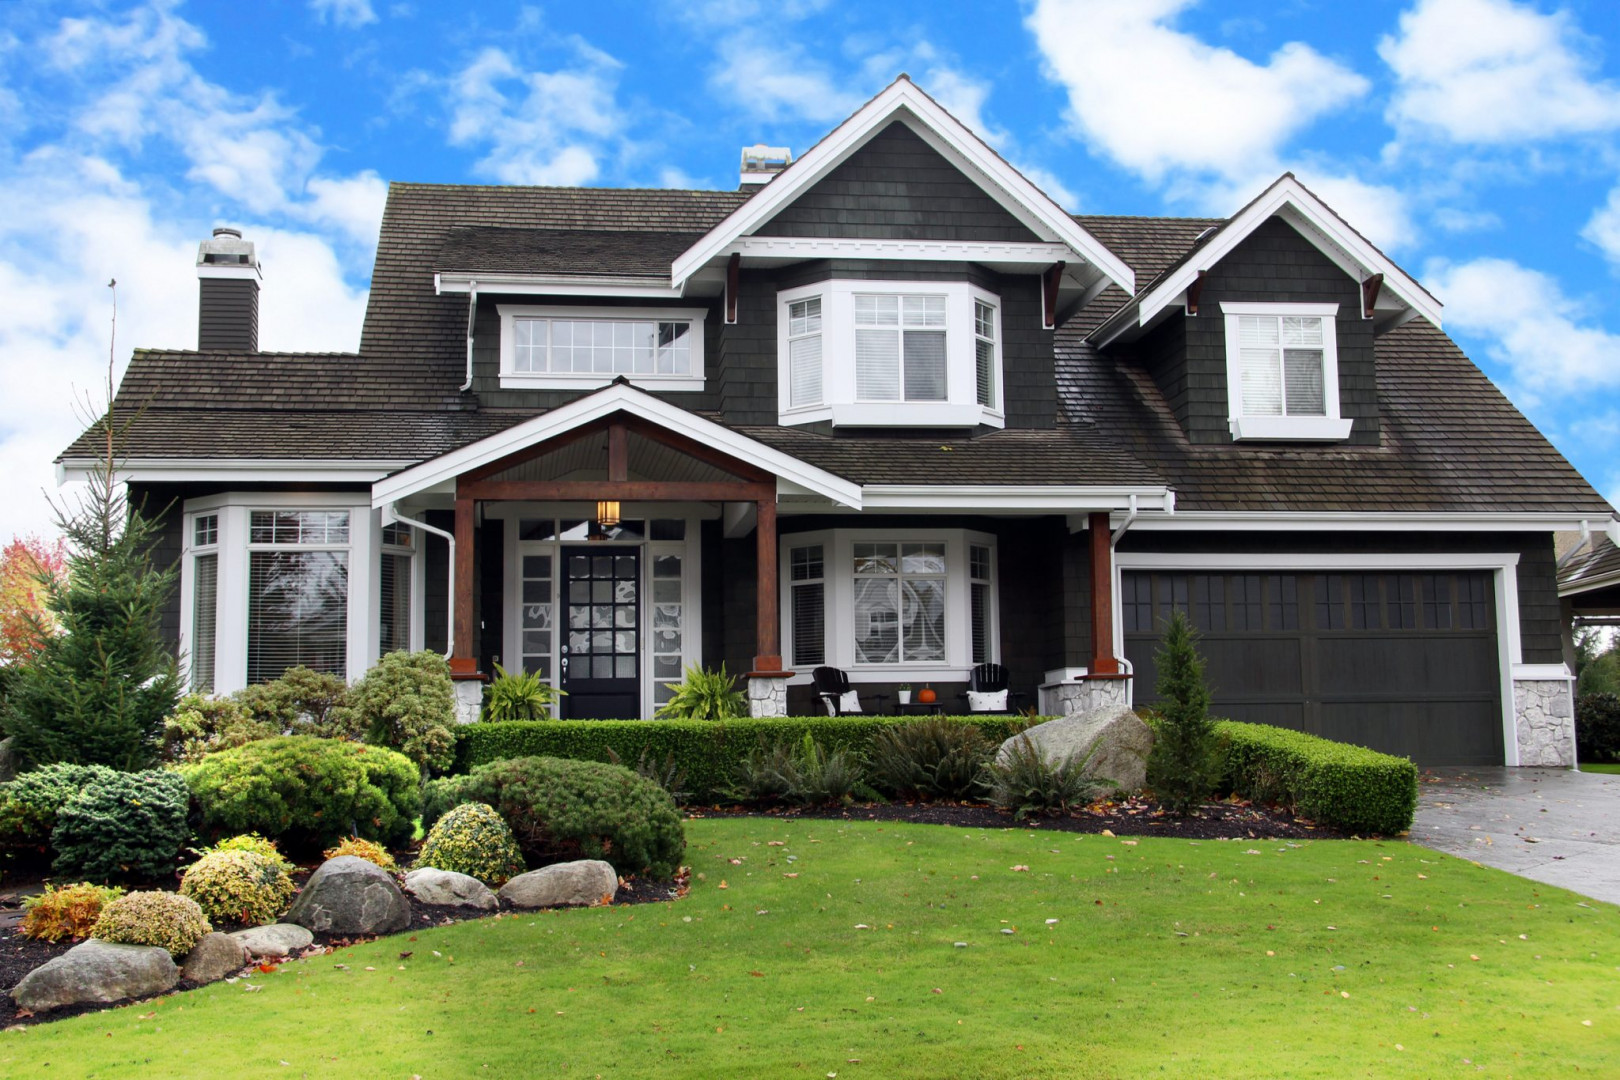 6 Affordable Ways to Boost your Home's Curb Appeal